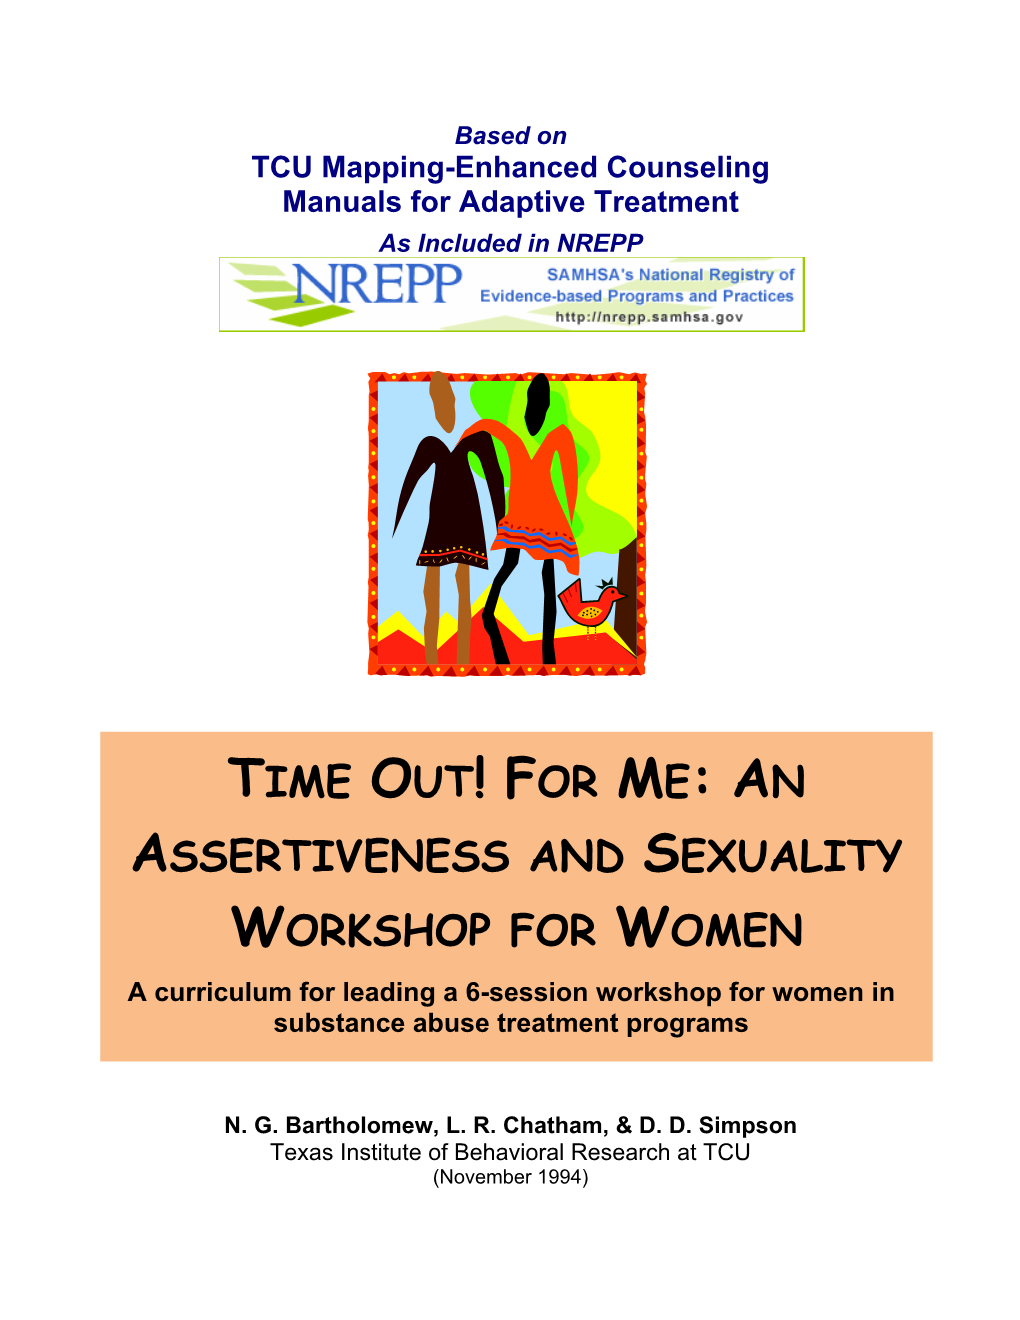 Time Out! for Me: an Assertiveness/Sexuality Workshop for Women in Treatment